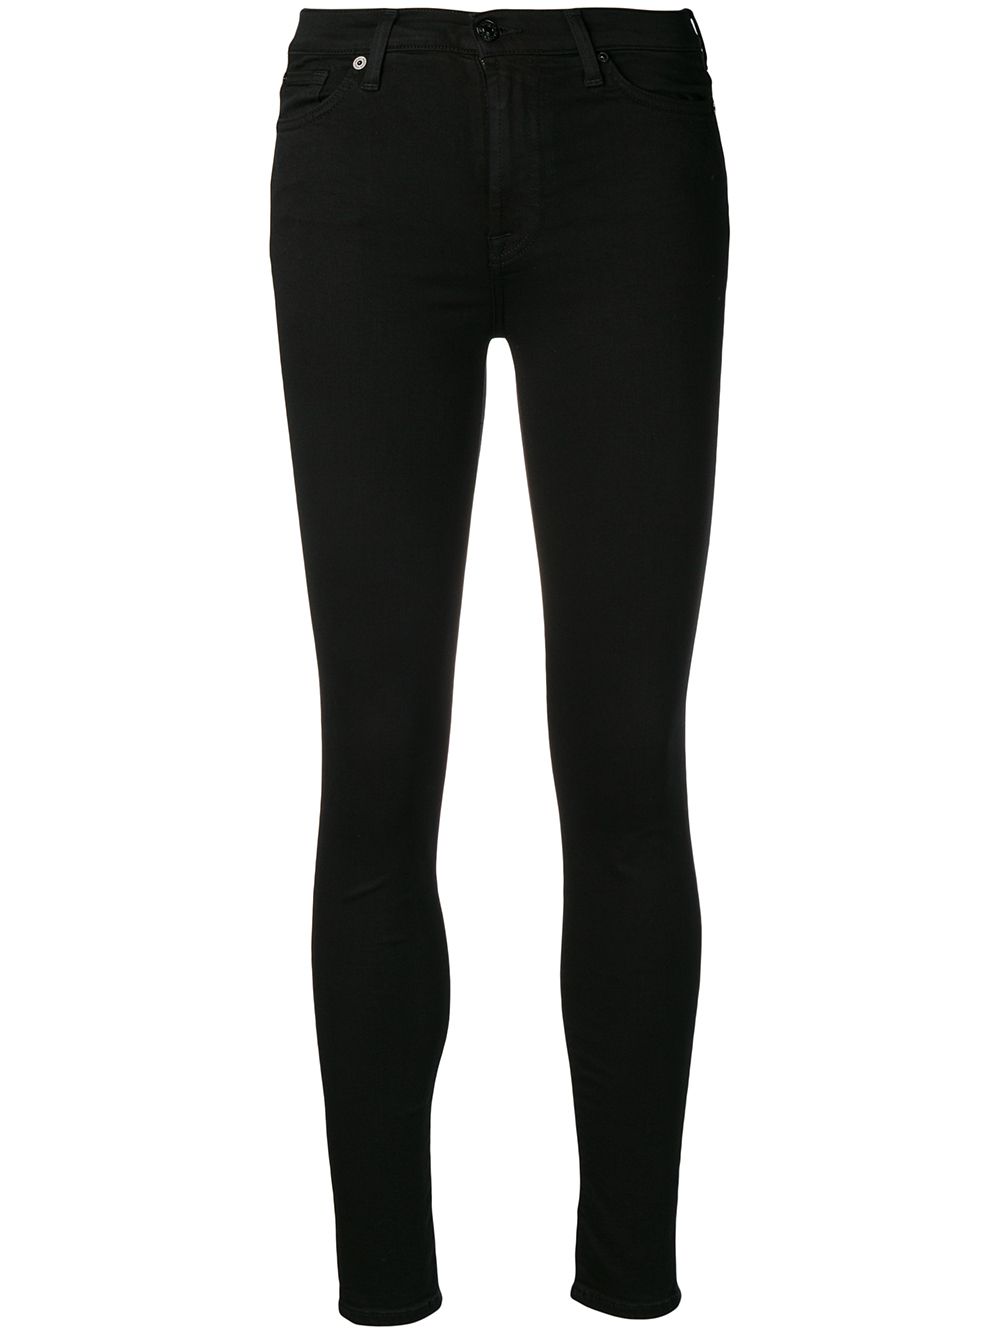 7 For All Mankind 7 FOR ALL MANKIND- Slim Fit High Waisted Jeans